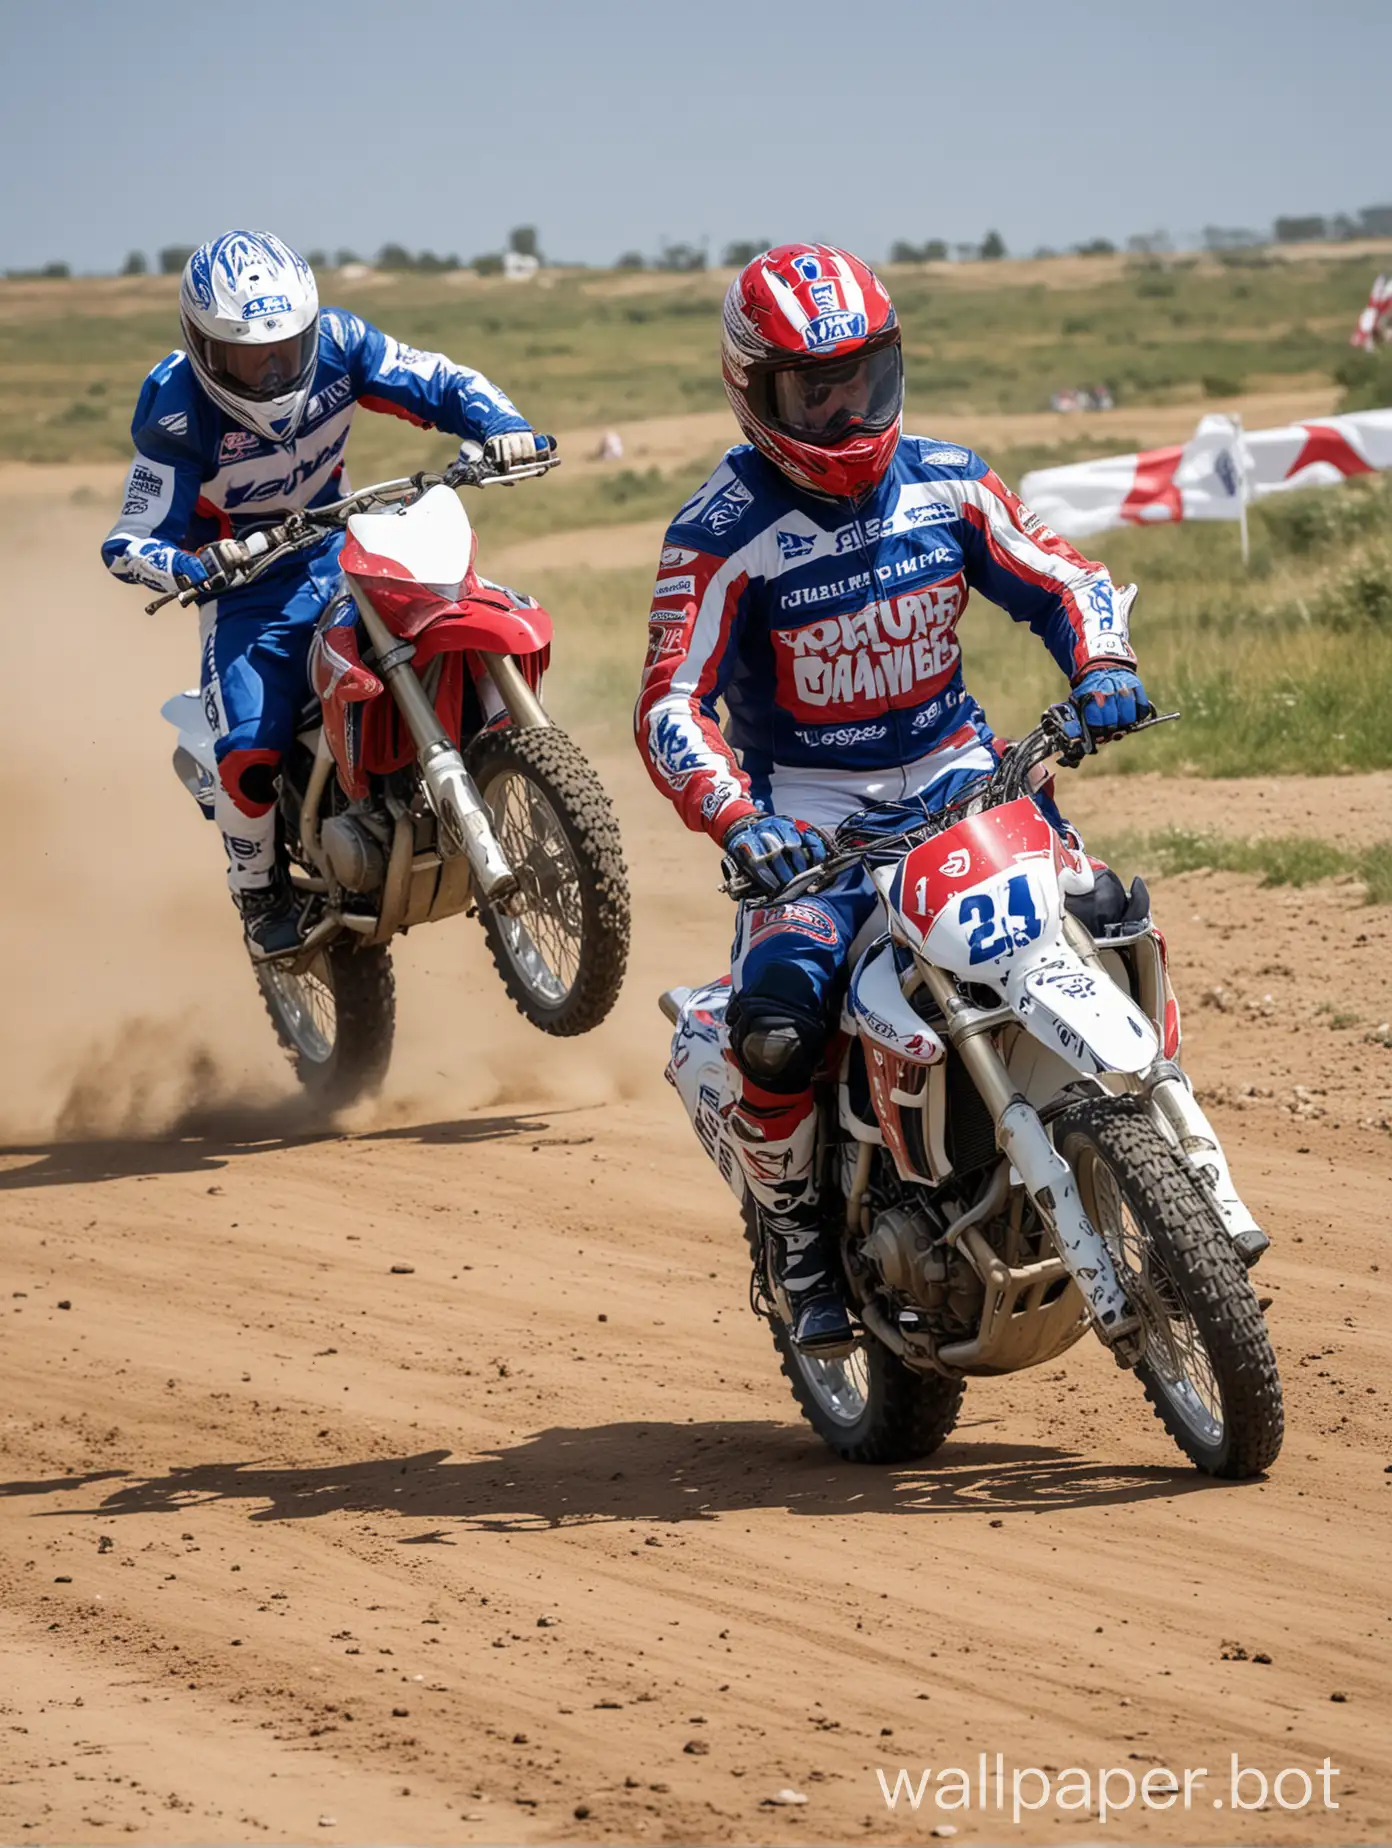 Intense-Moto-Race-with-Two-Bikers-in-Blue-and-White-and-Red-and-White-Gear